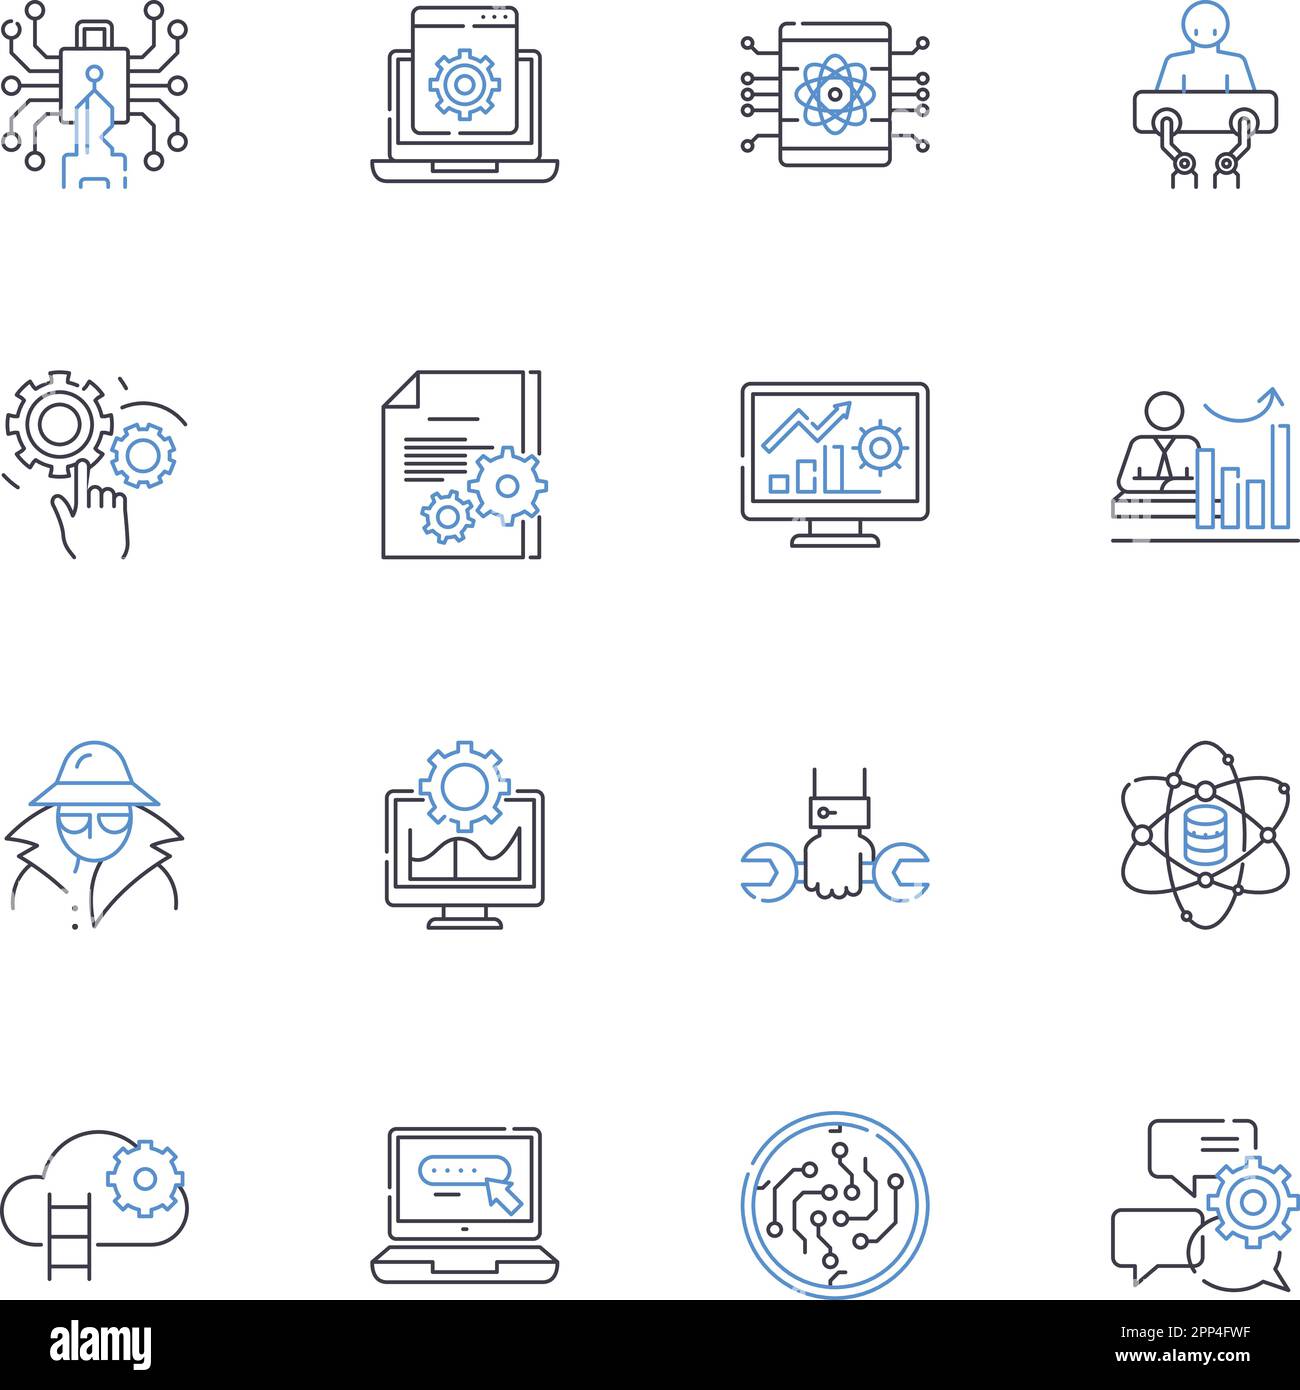 Assurance line icons collection. Trust, Confidence, Reliability, Security, Peace, Protection, Guarantee vector and linear illustration. Dependability Stock Vector